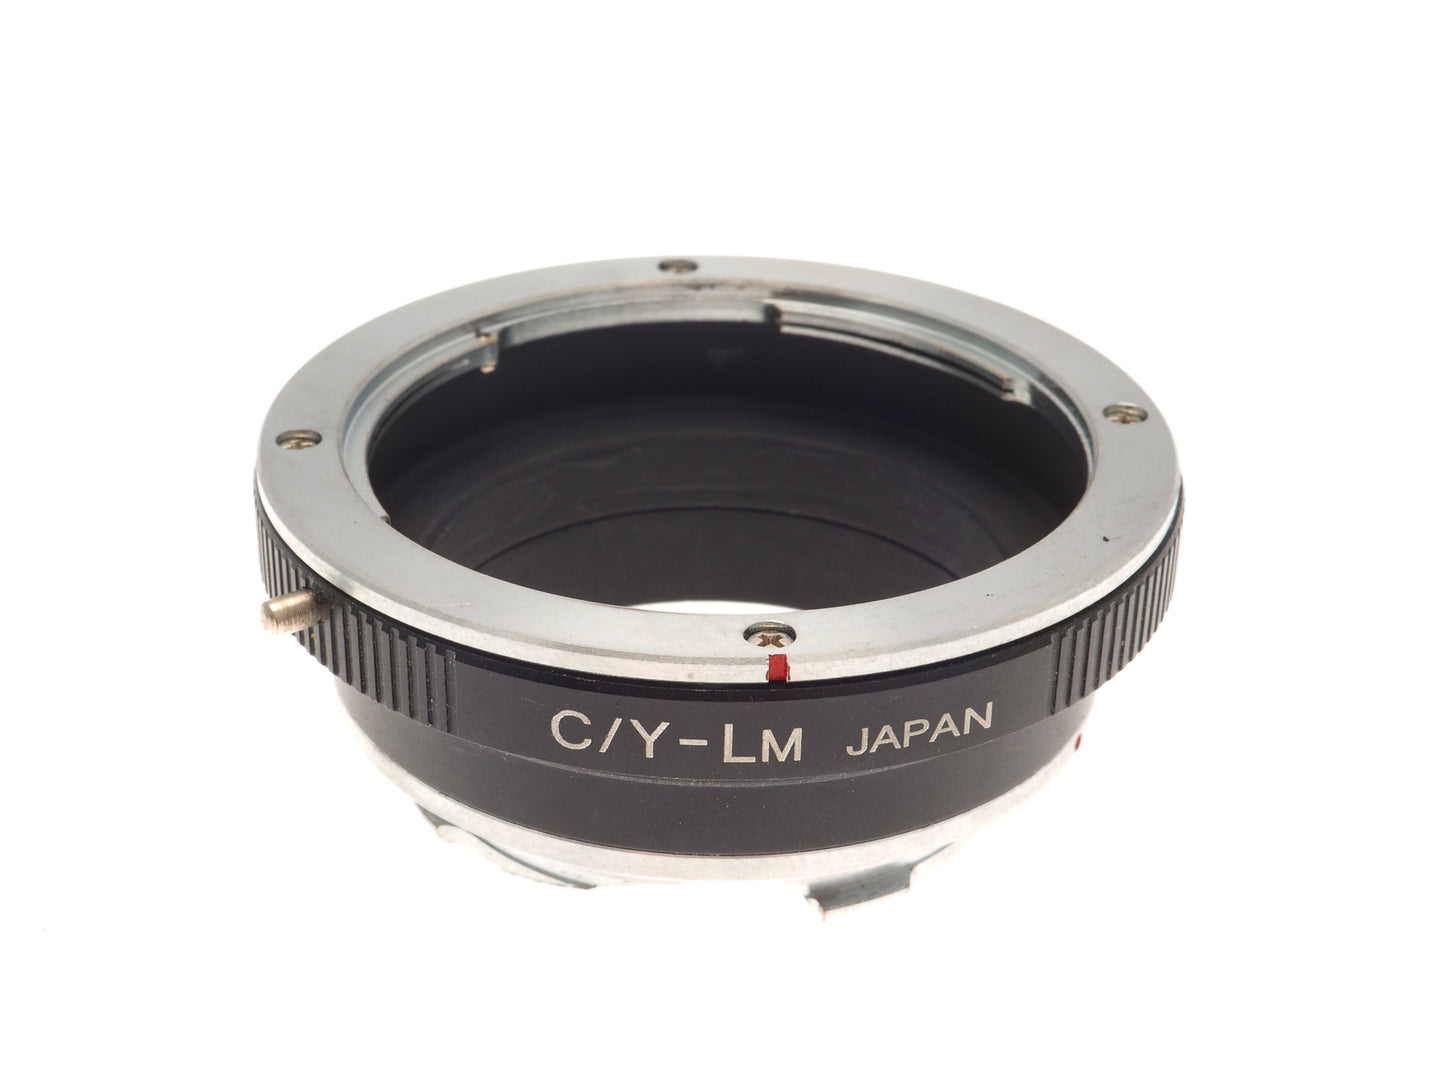 Generic Contax/Yashica - Leica M (CY - LM) Adapter - Lens Adapter